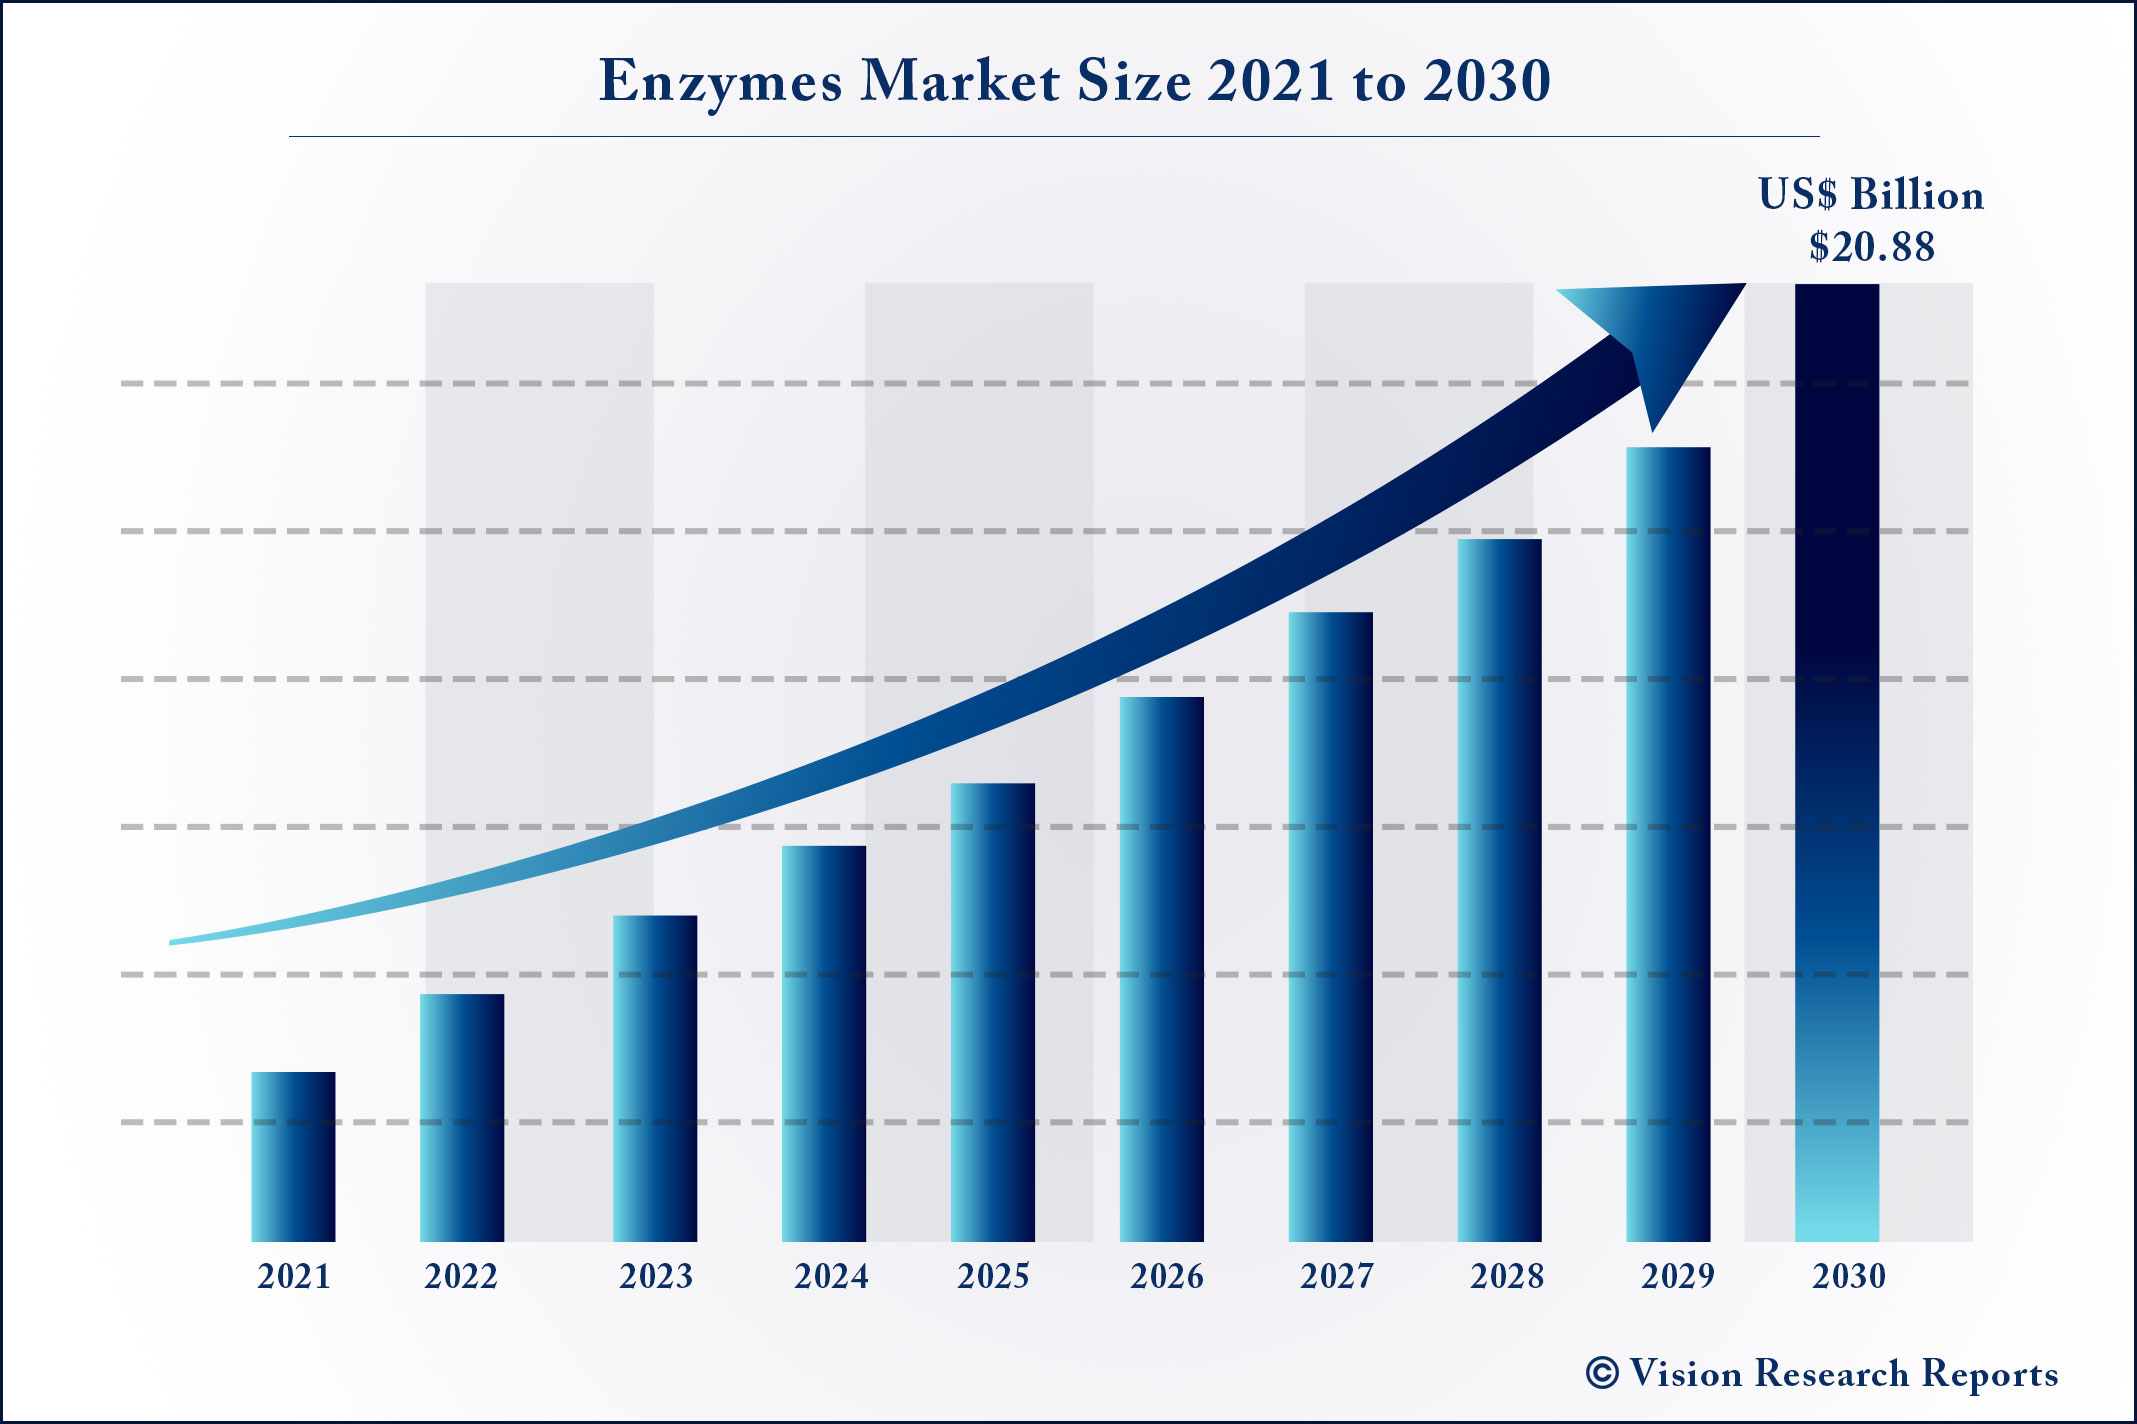 Enzymes Market Size 2021 to 2030